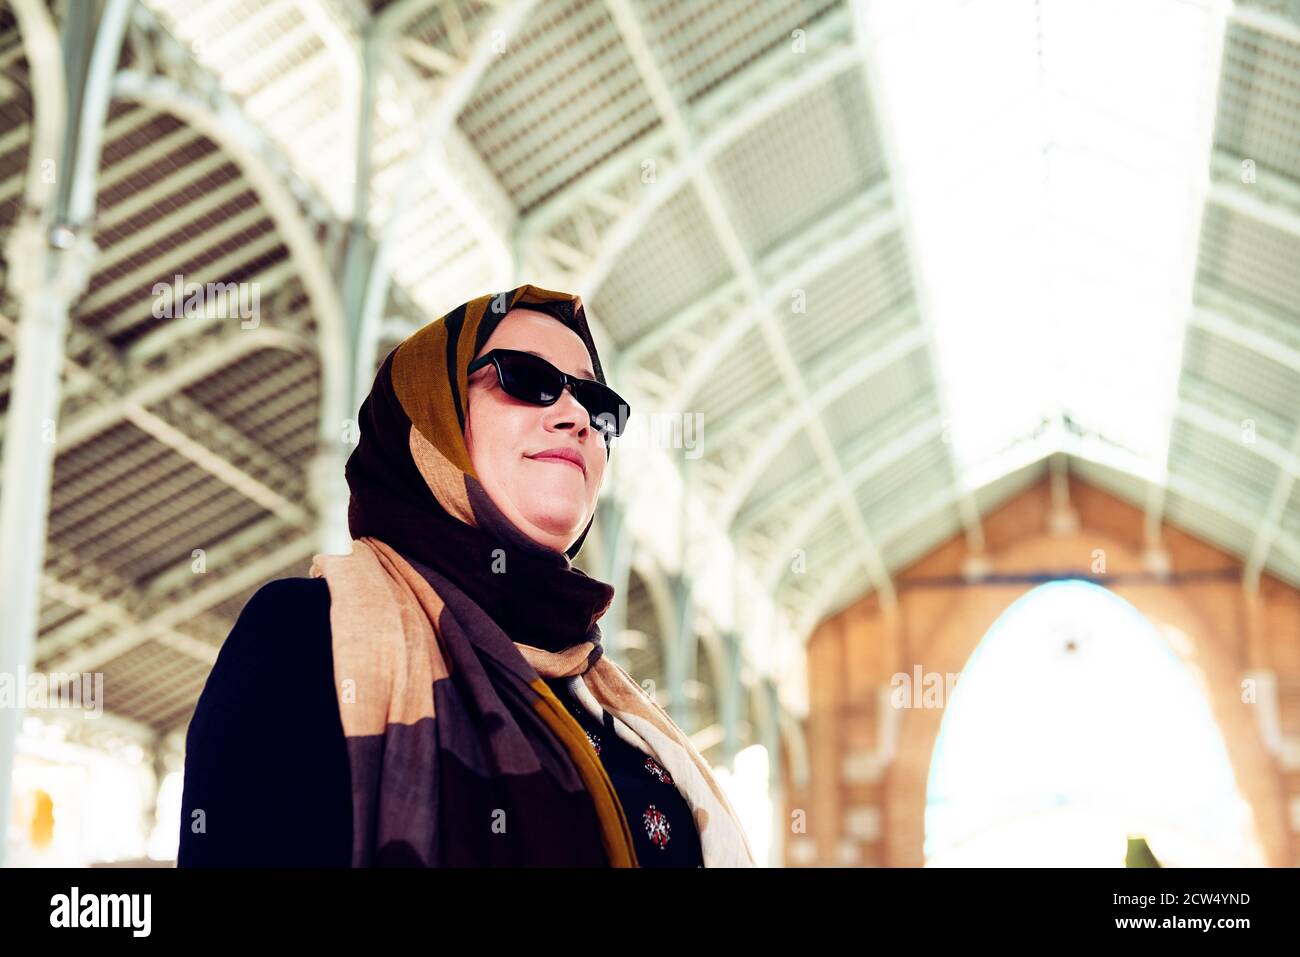 Muslim woman in headscarf and sunglasses inside a compound with a metal roof. copy space Stock Photo